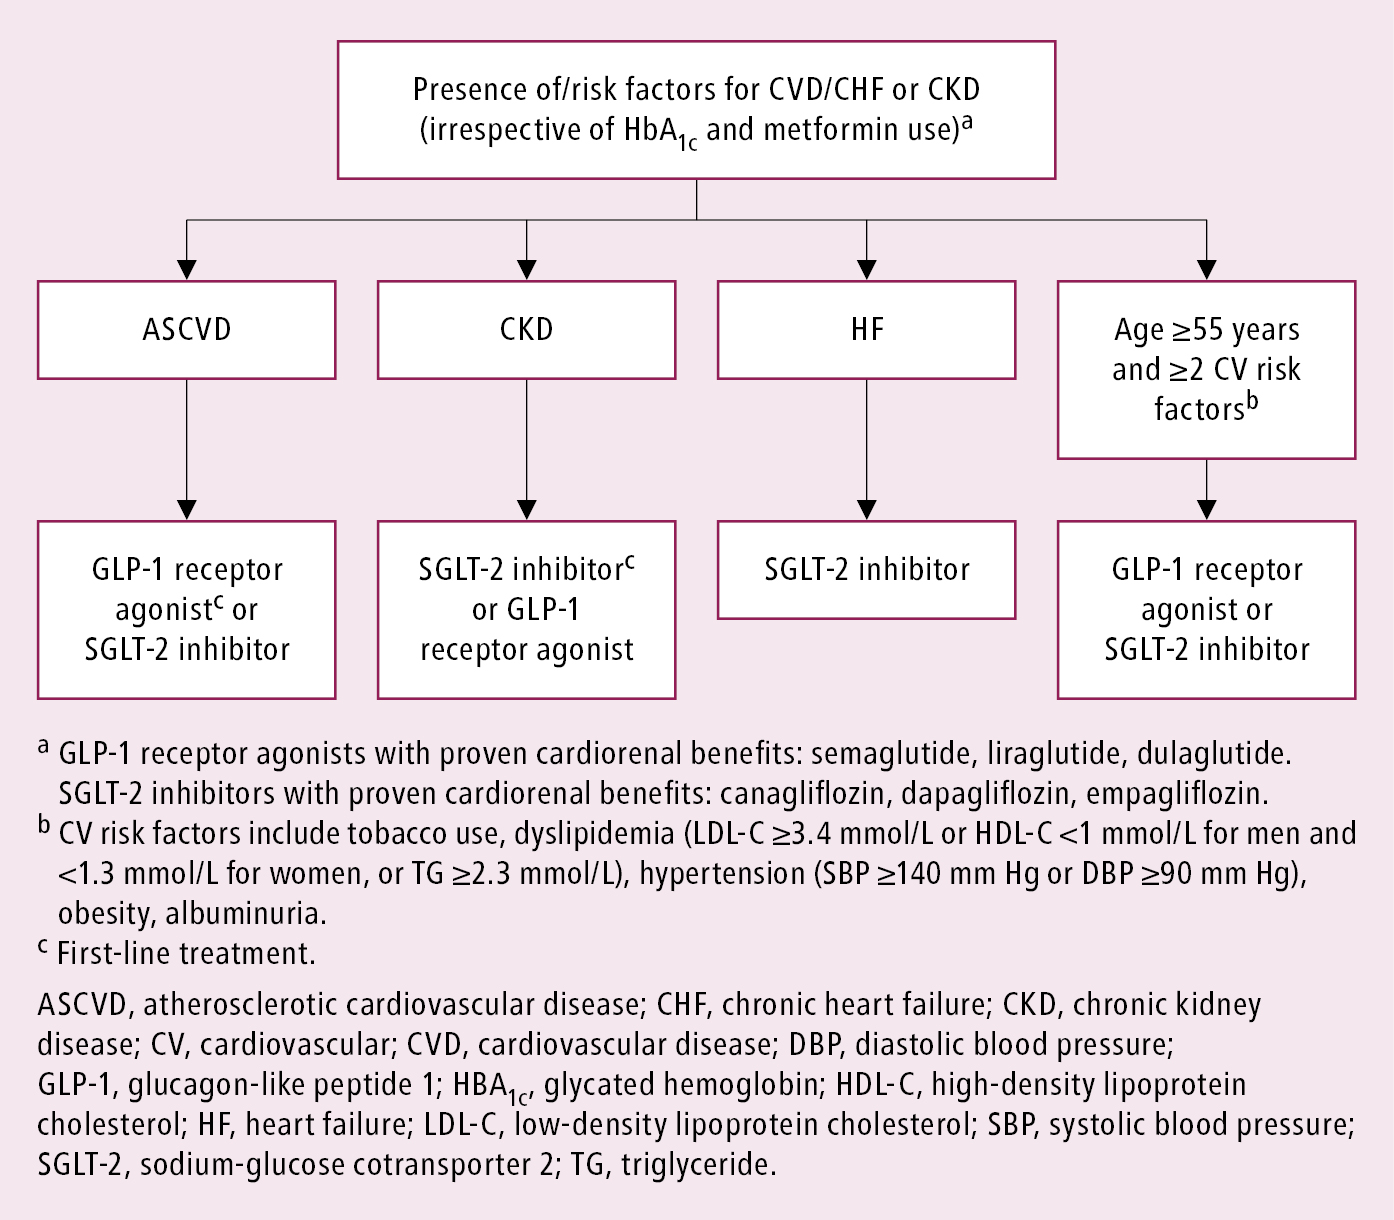 Figure 031_0007.  Algorithm for therapy advancement in type 2 diabetes mellitus based on cardiorenal benefits.  Adapted from    Can J Diabetes. 2020 Oct;44(7):575-591    and 2022 guidelines from the American Diabetes Association and European Association for the Study of Diabetes . 